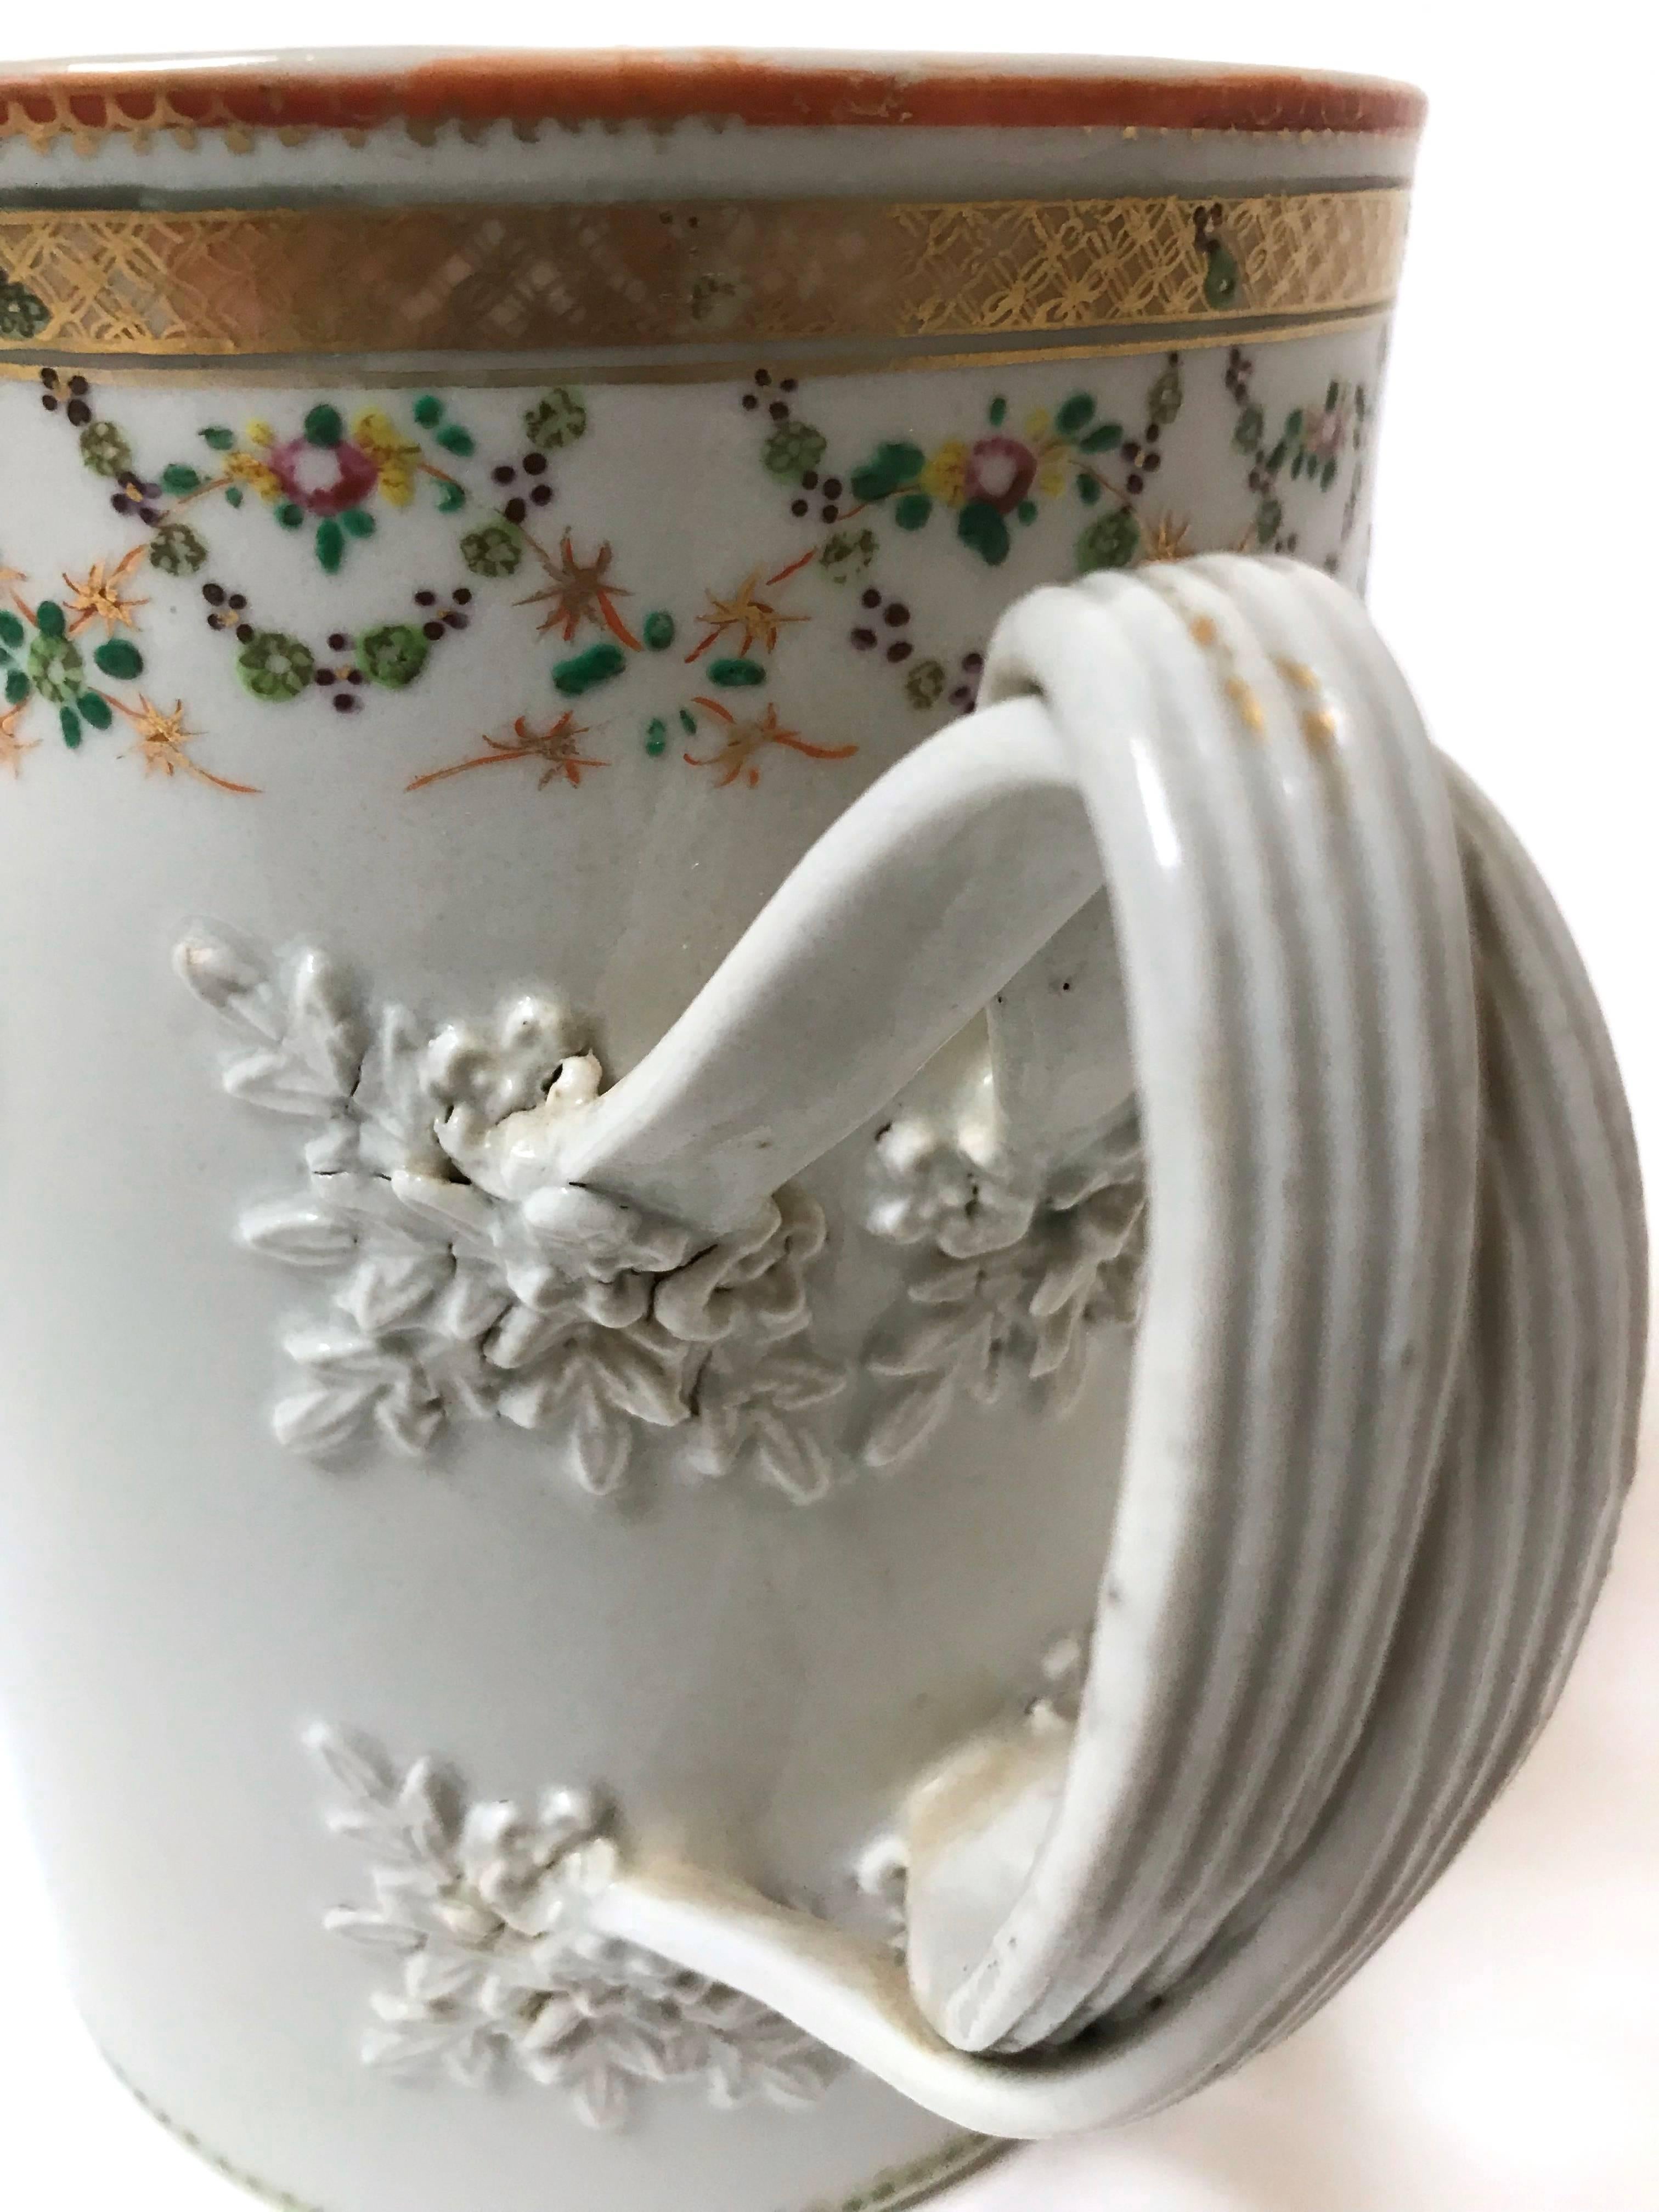 A rare large cylindrical Chinese export porcelain tankard, sometimes referred to as a toasting cup, dating to the late 1700s, with applied twisted and reeded, double-strap handles and high relief carved floral and foliate terminals, over-glaze